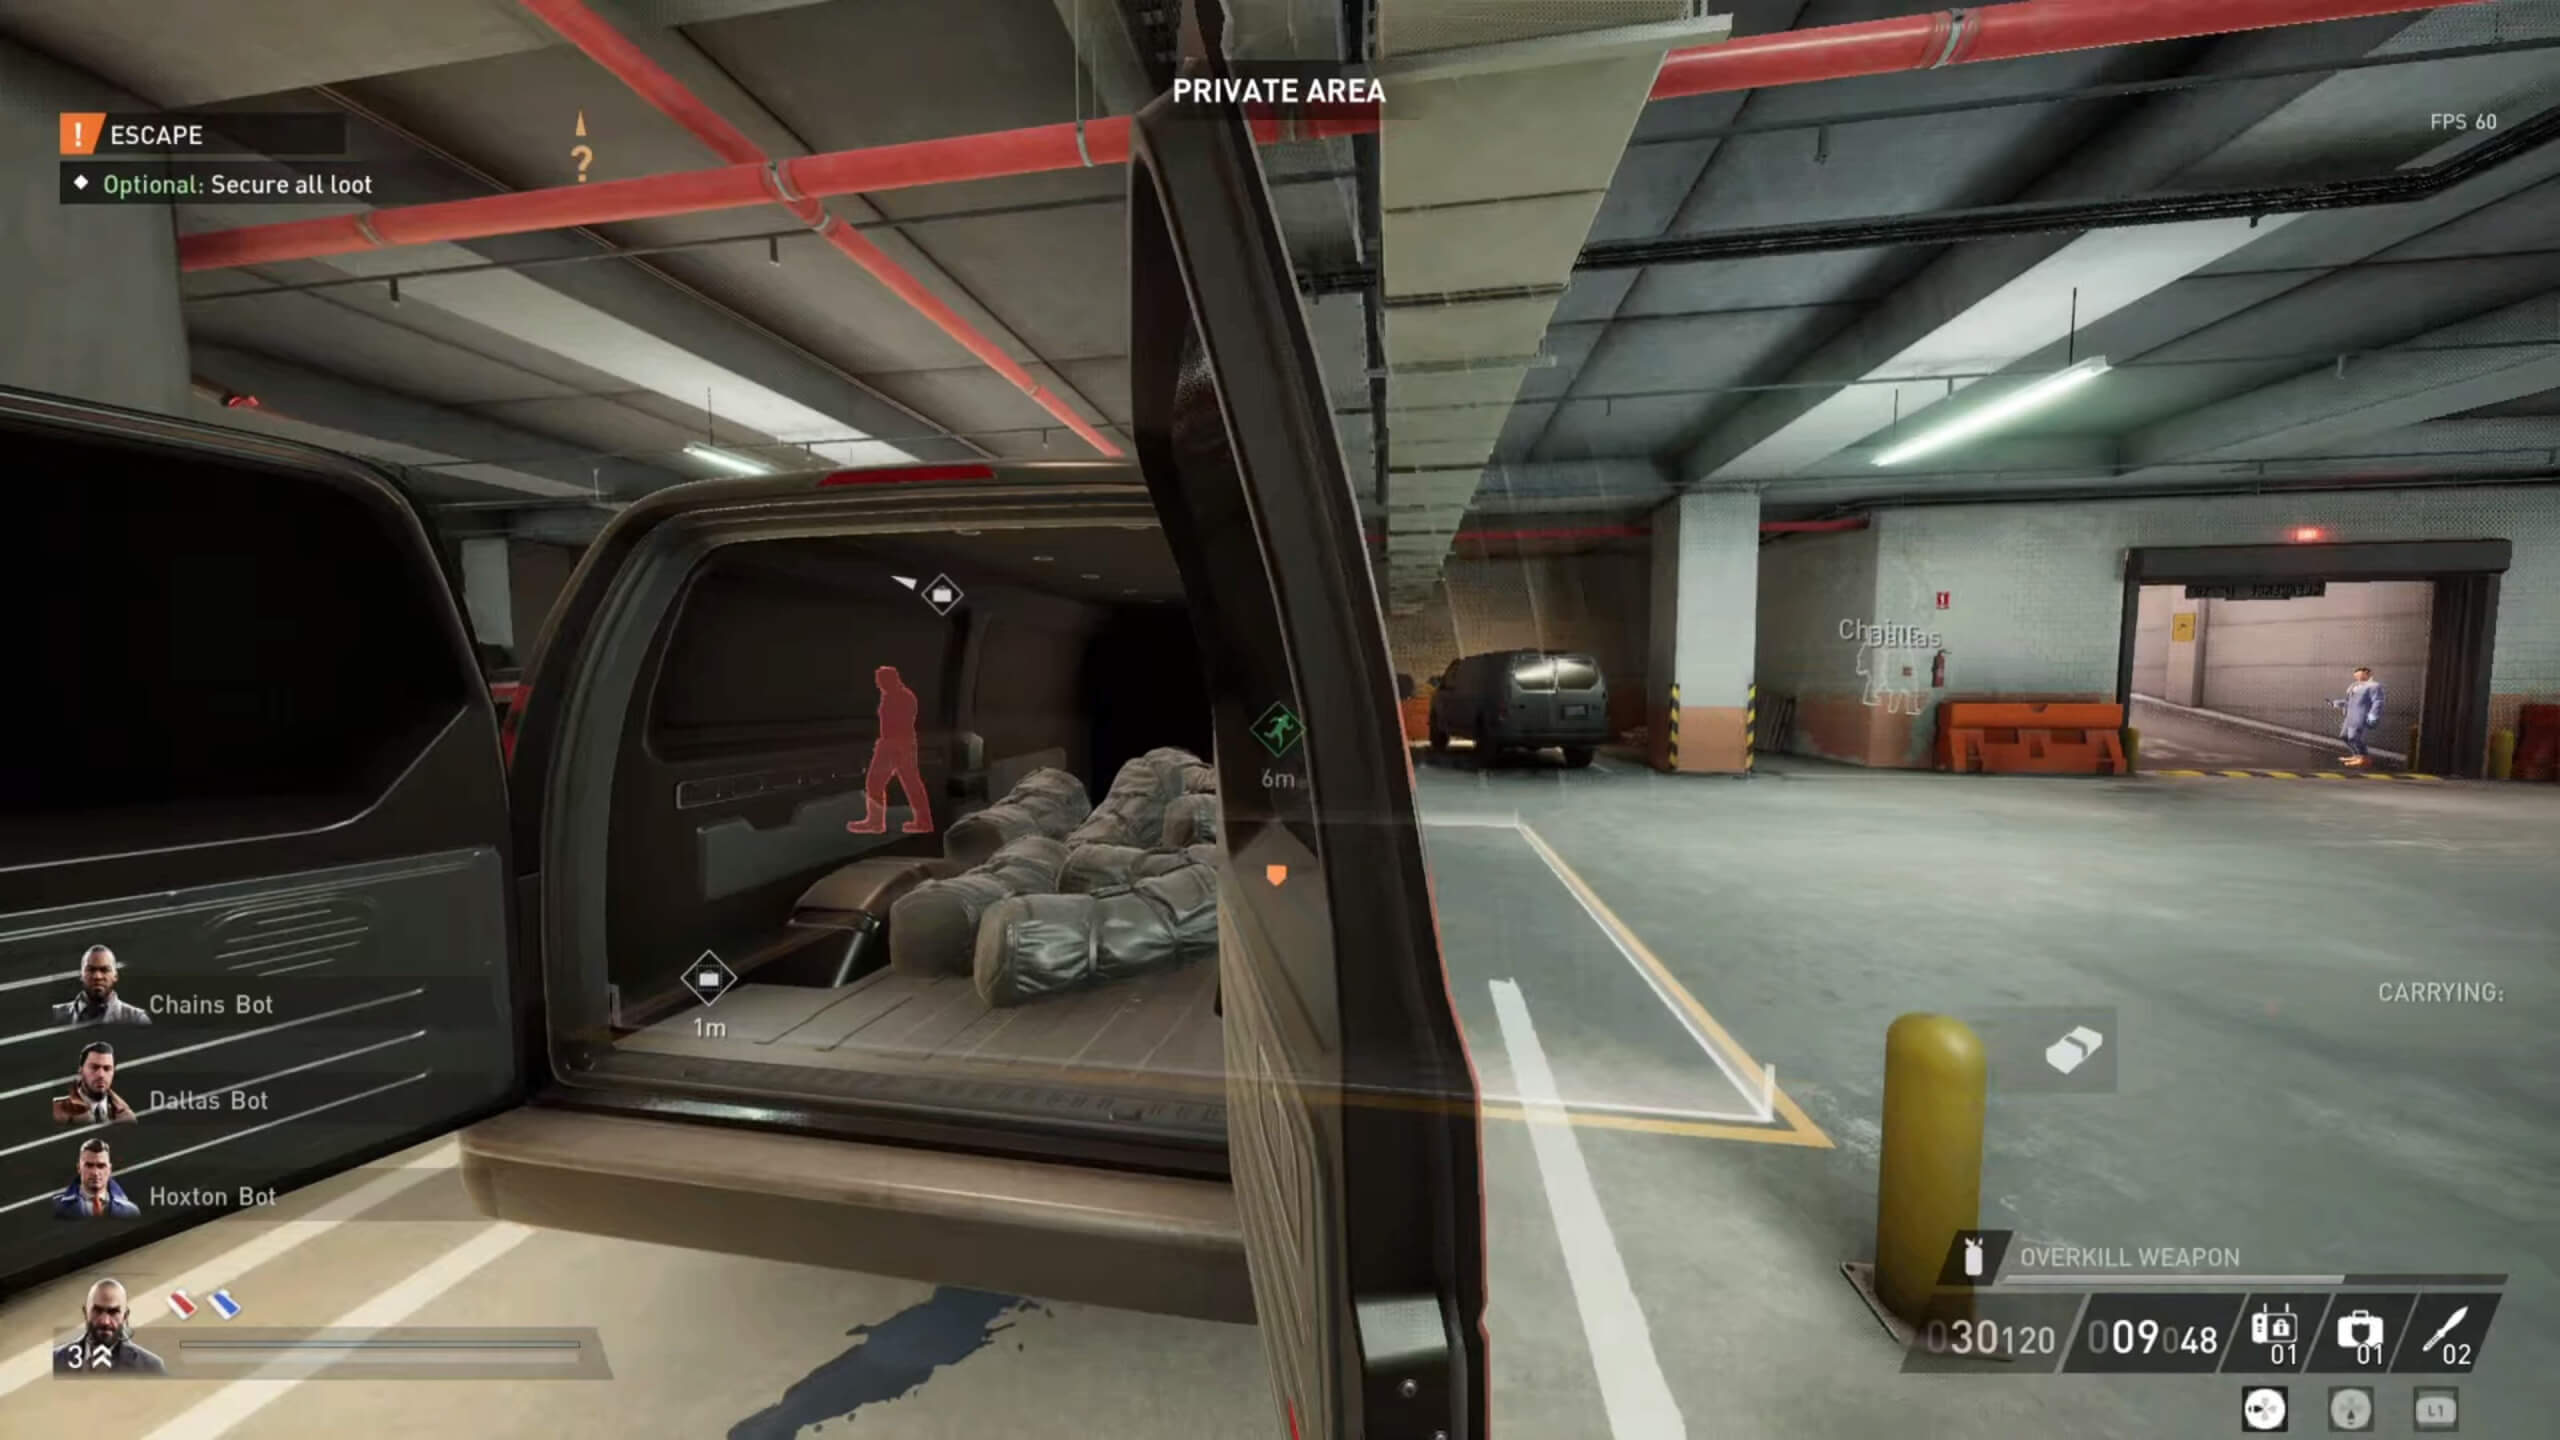 The image shows a van full of loot and the player character is unmasked.